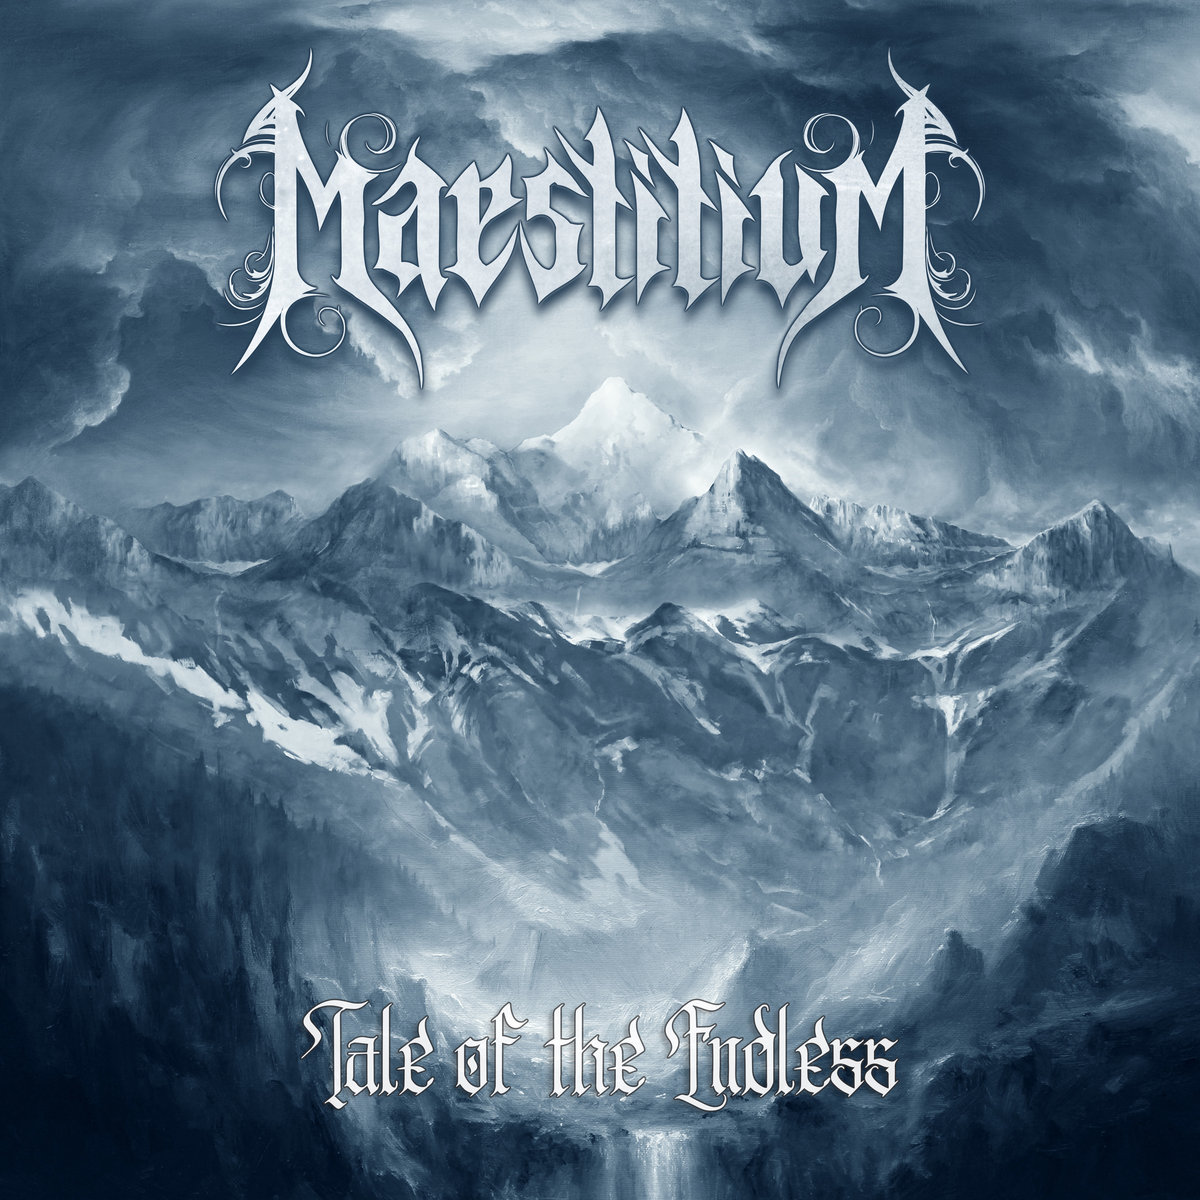 Maestitium – Tale of the Endless